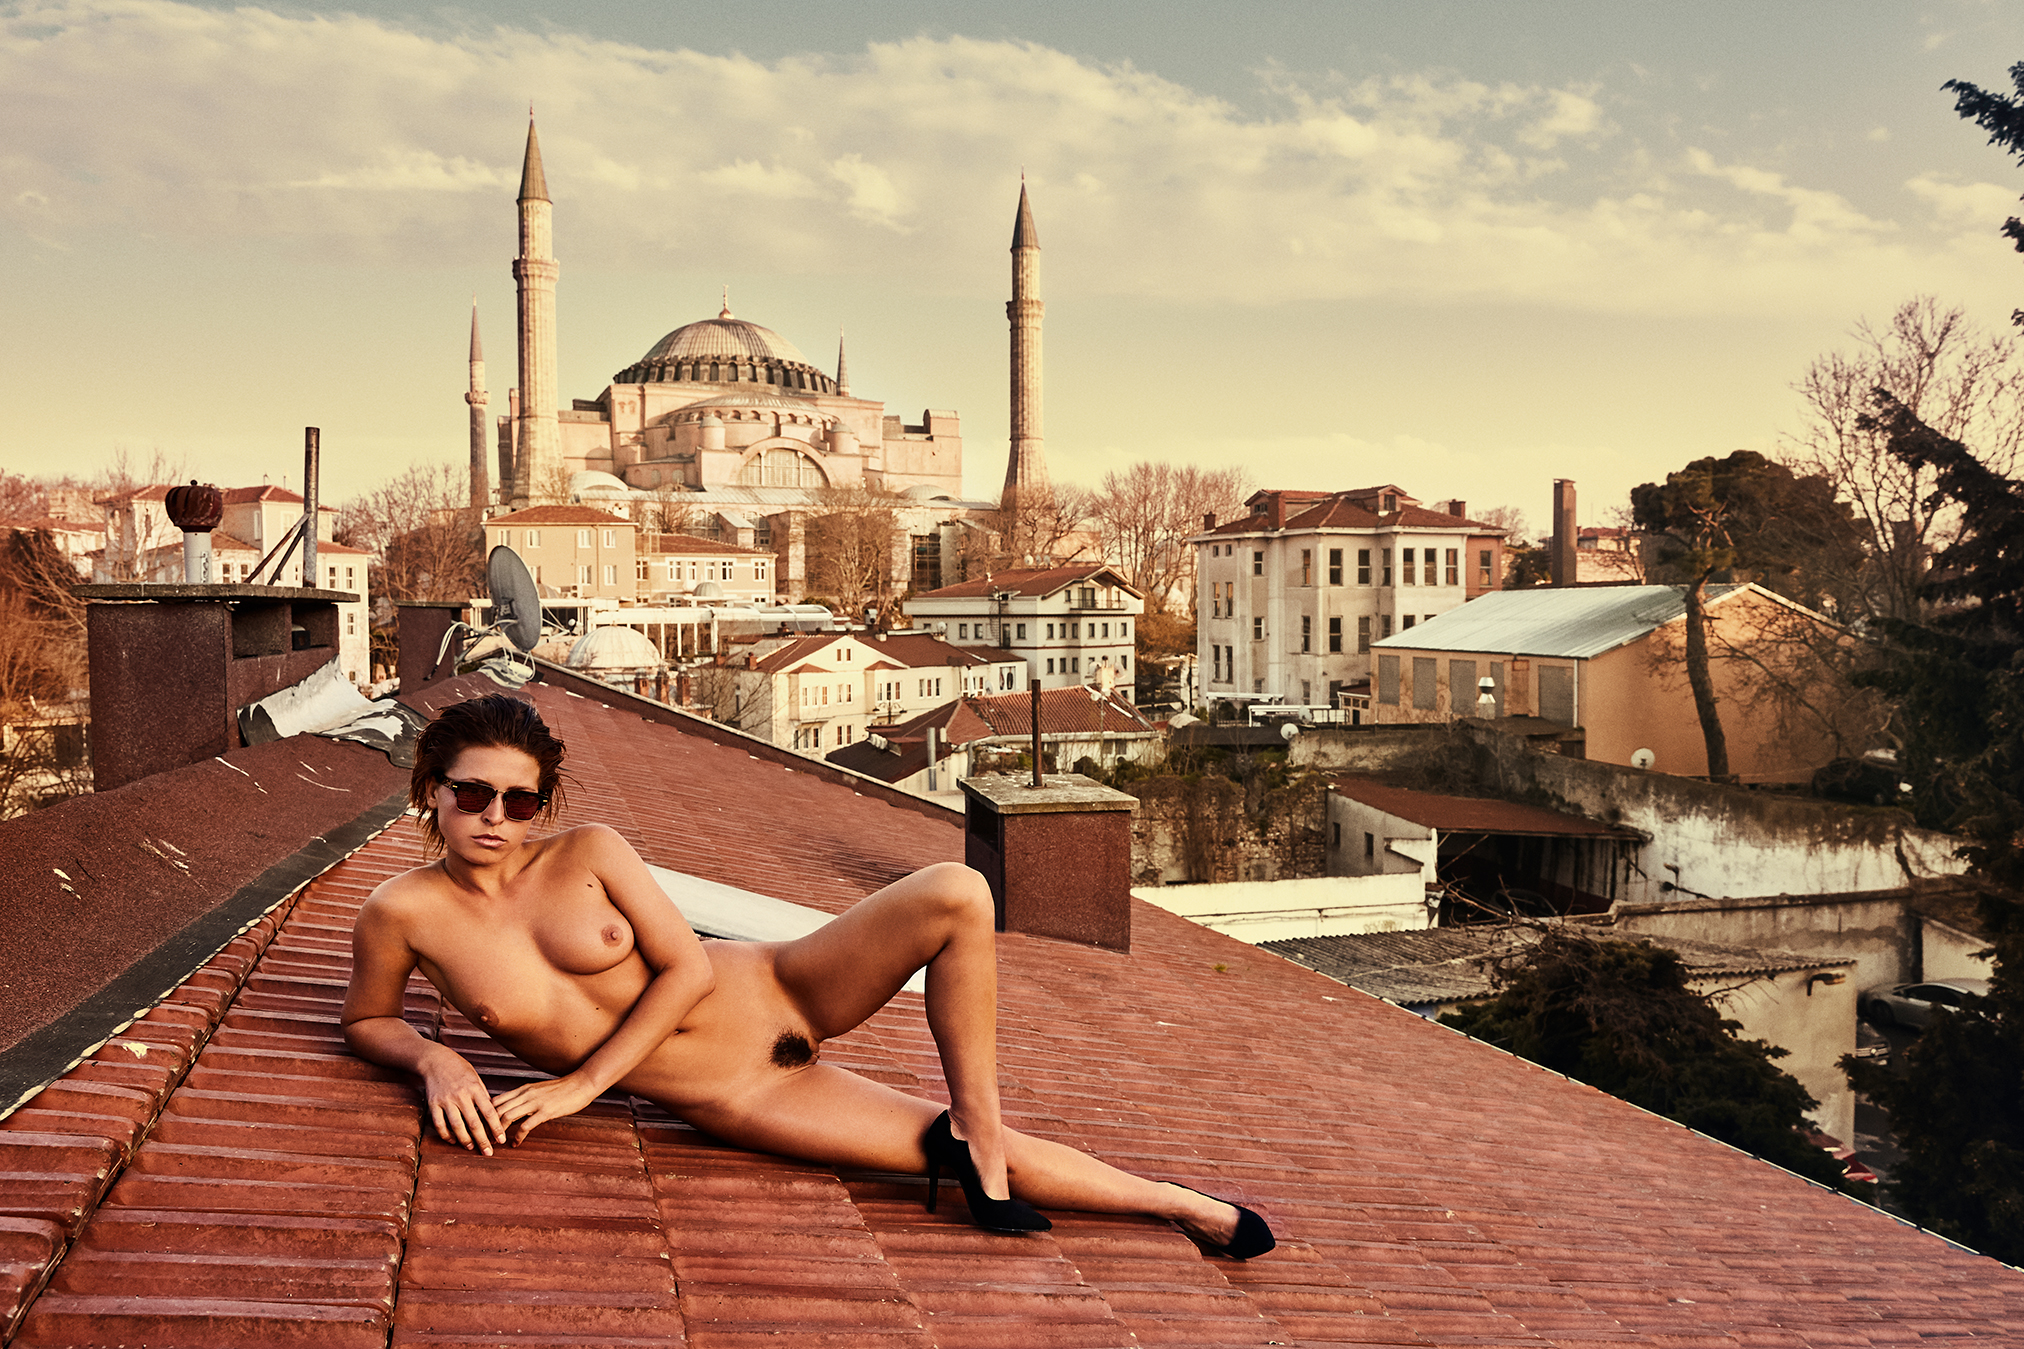 Discover the erotic side of Turkey with these flag-inspired galleries